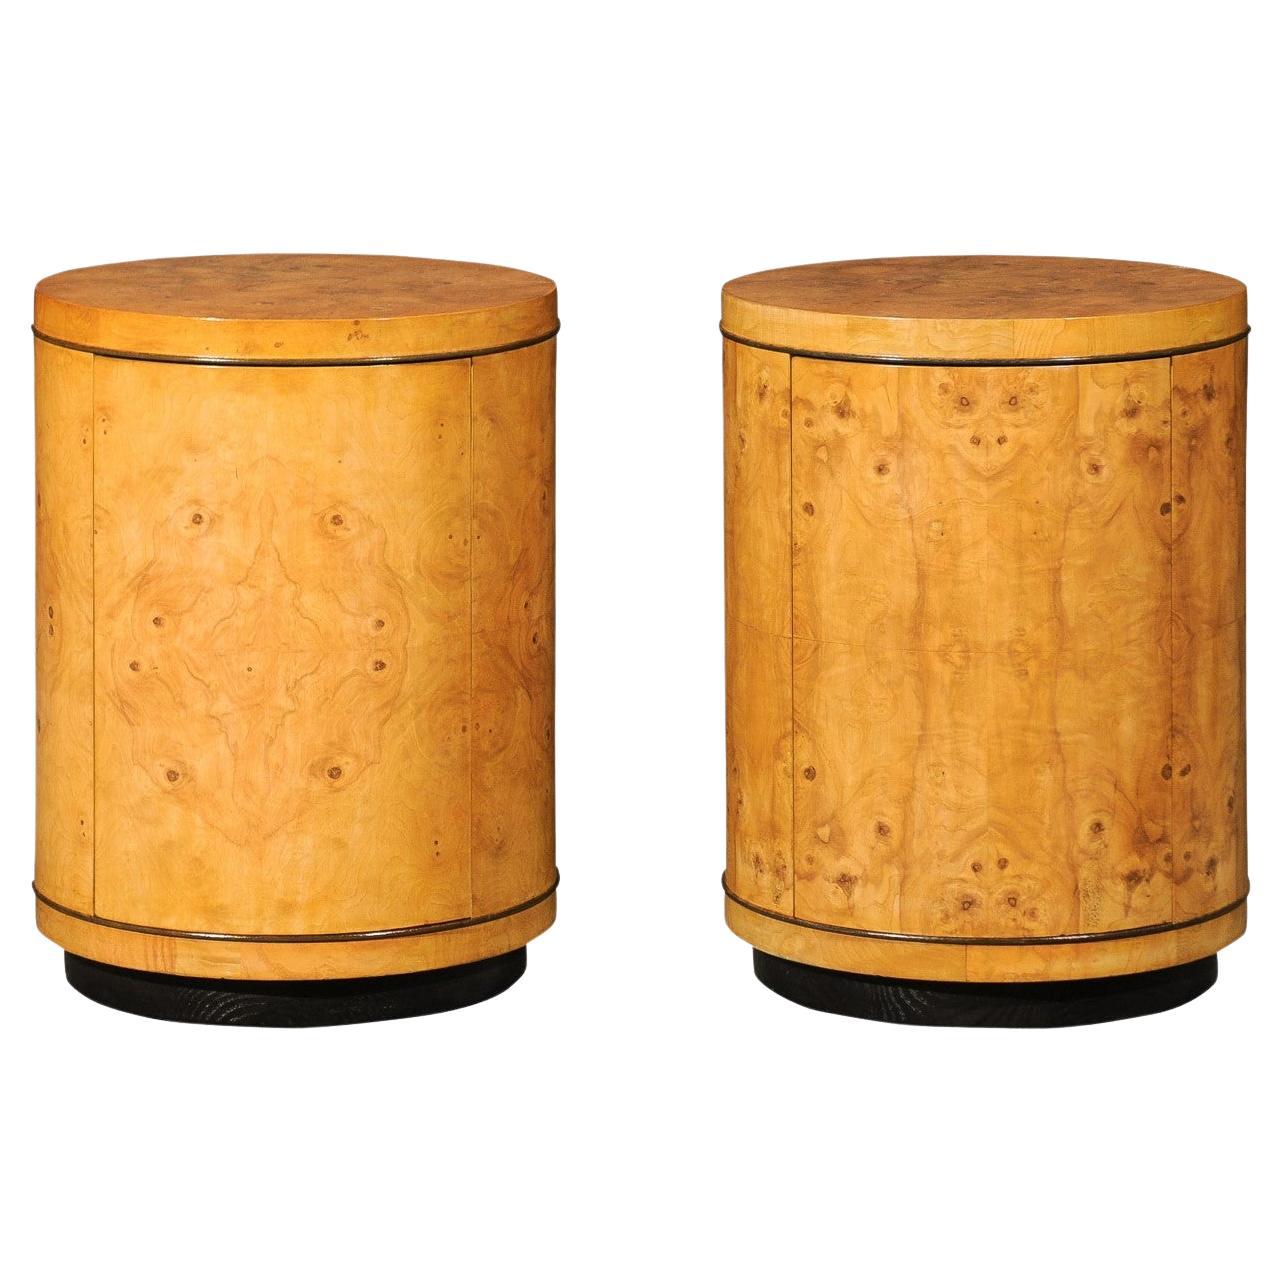 Gorgeous Pair of Bookmatch Olivewood Cylinder Cabinets by Henredon, circa 1980